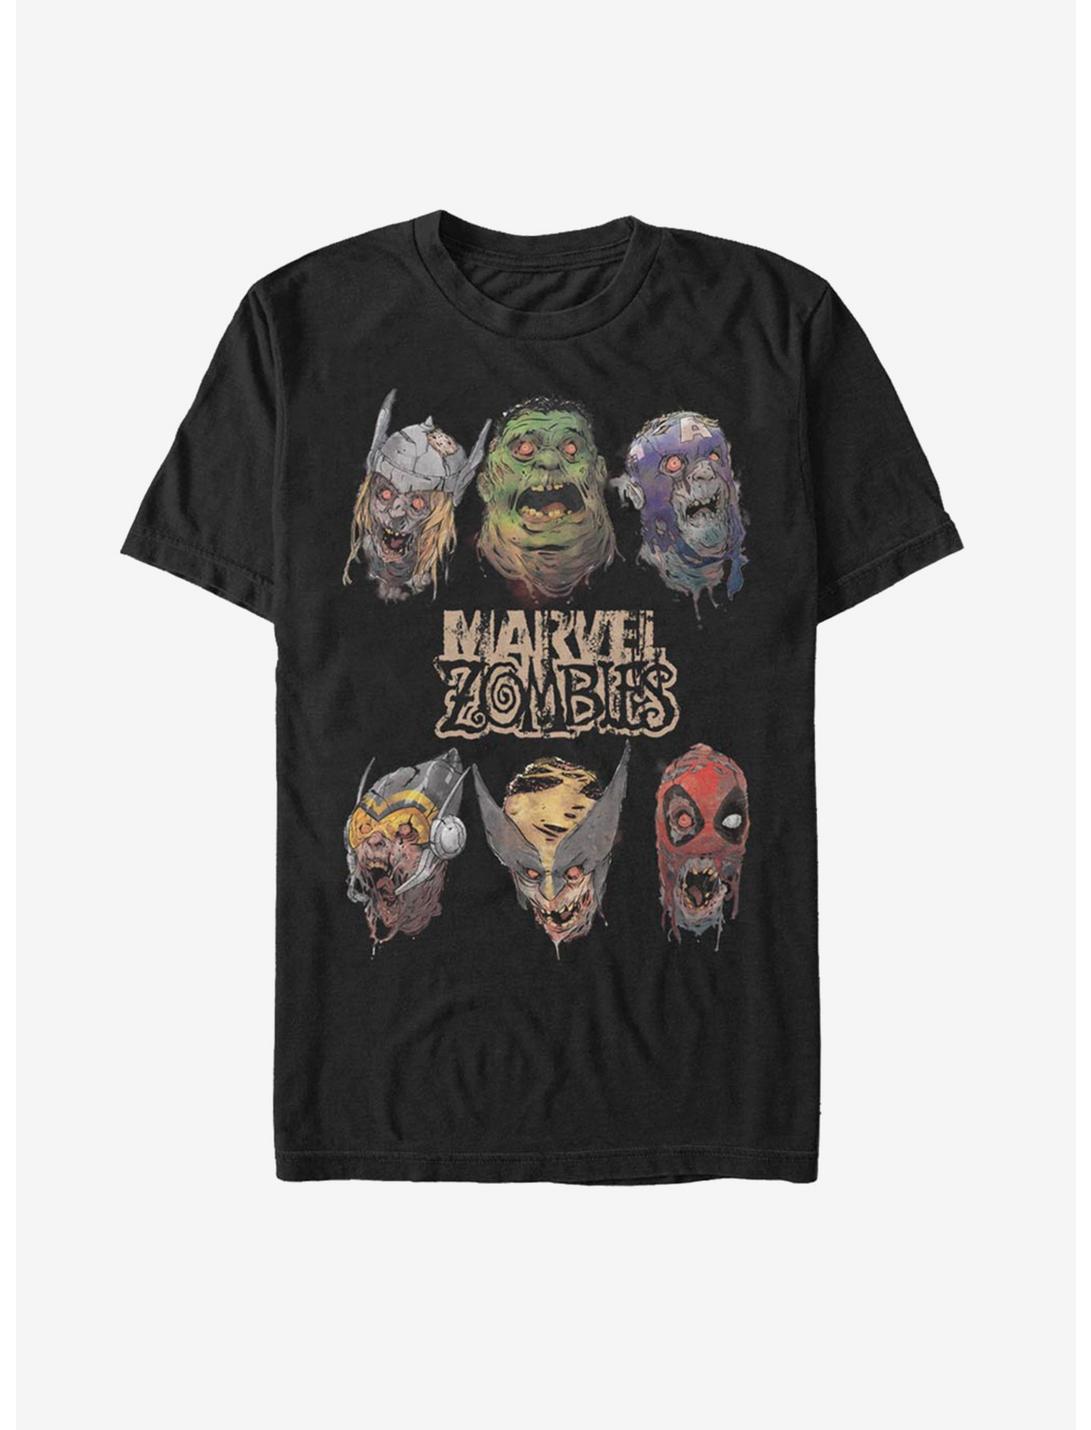 Marvel Zombies Heads Of Undead T-Shirt, BLACK, hi-res